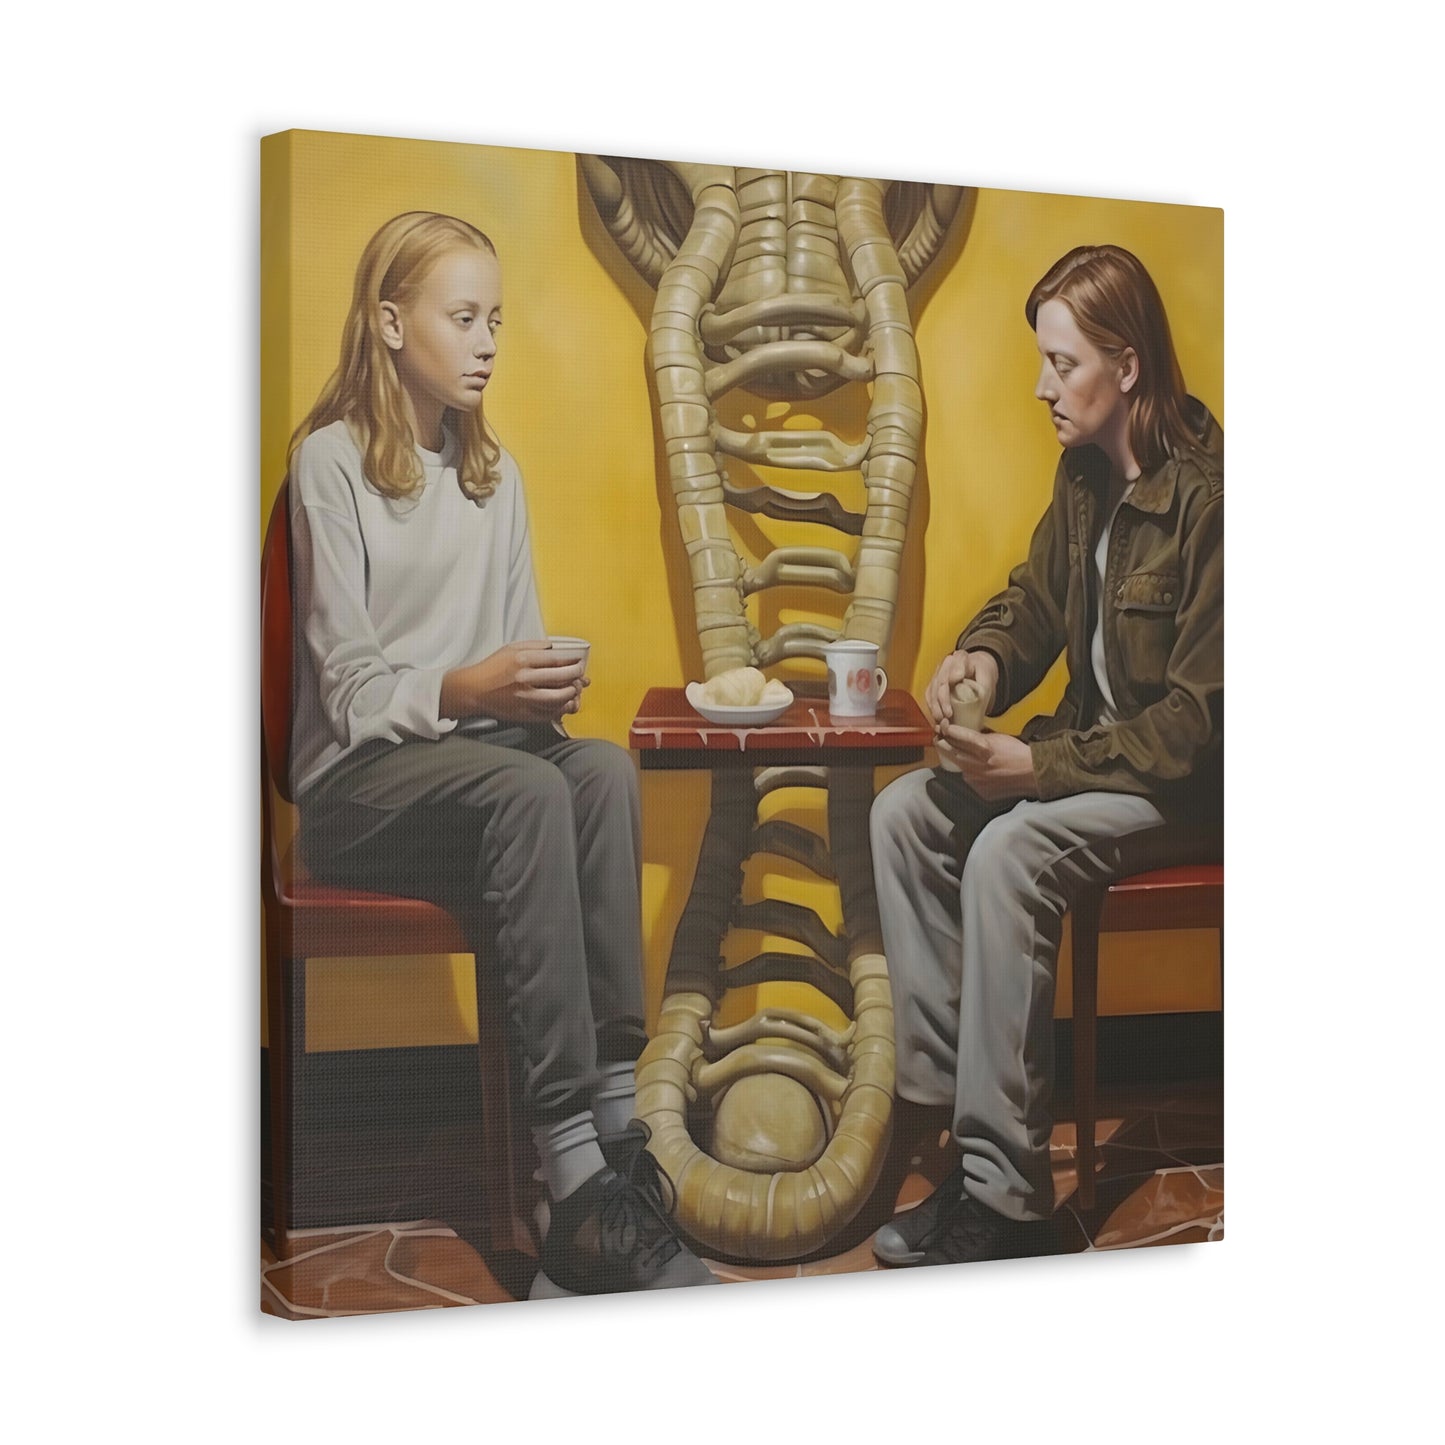 Kit Carter. Early Love Over Coffee. Exclusive Canvas Print